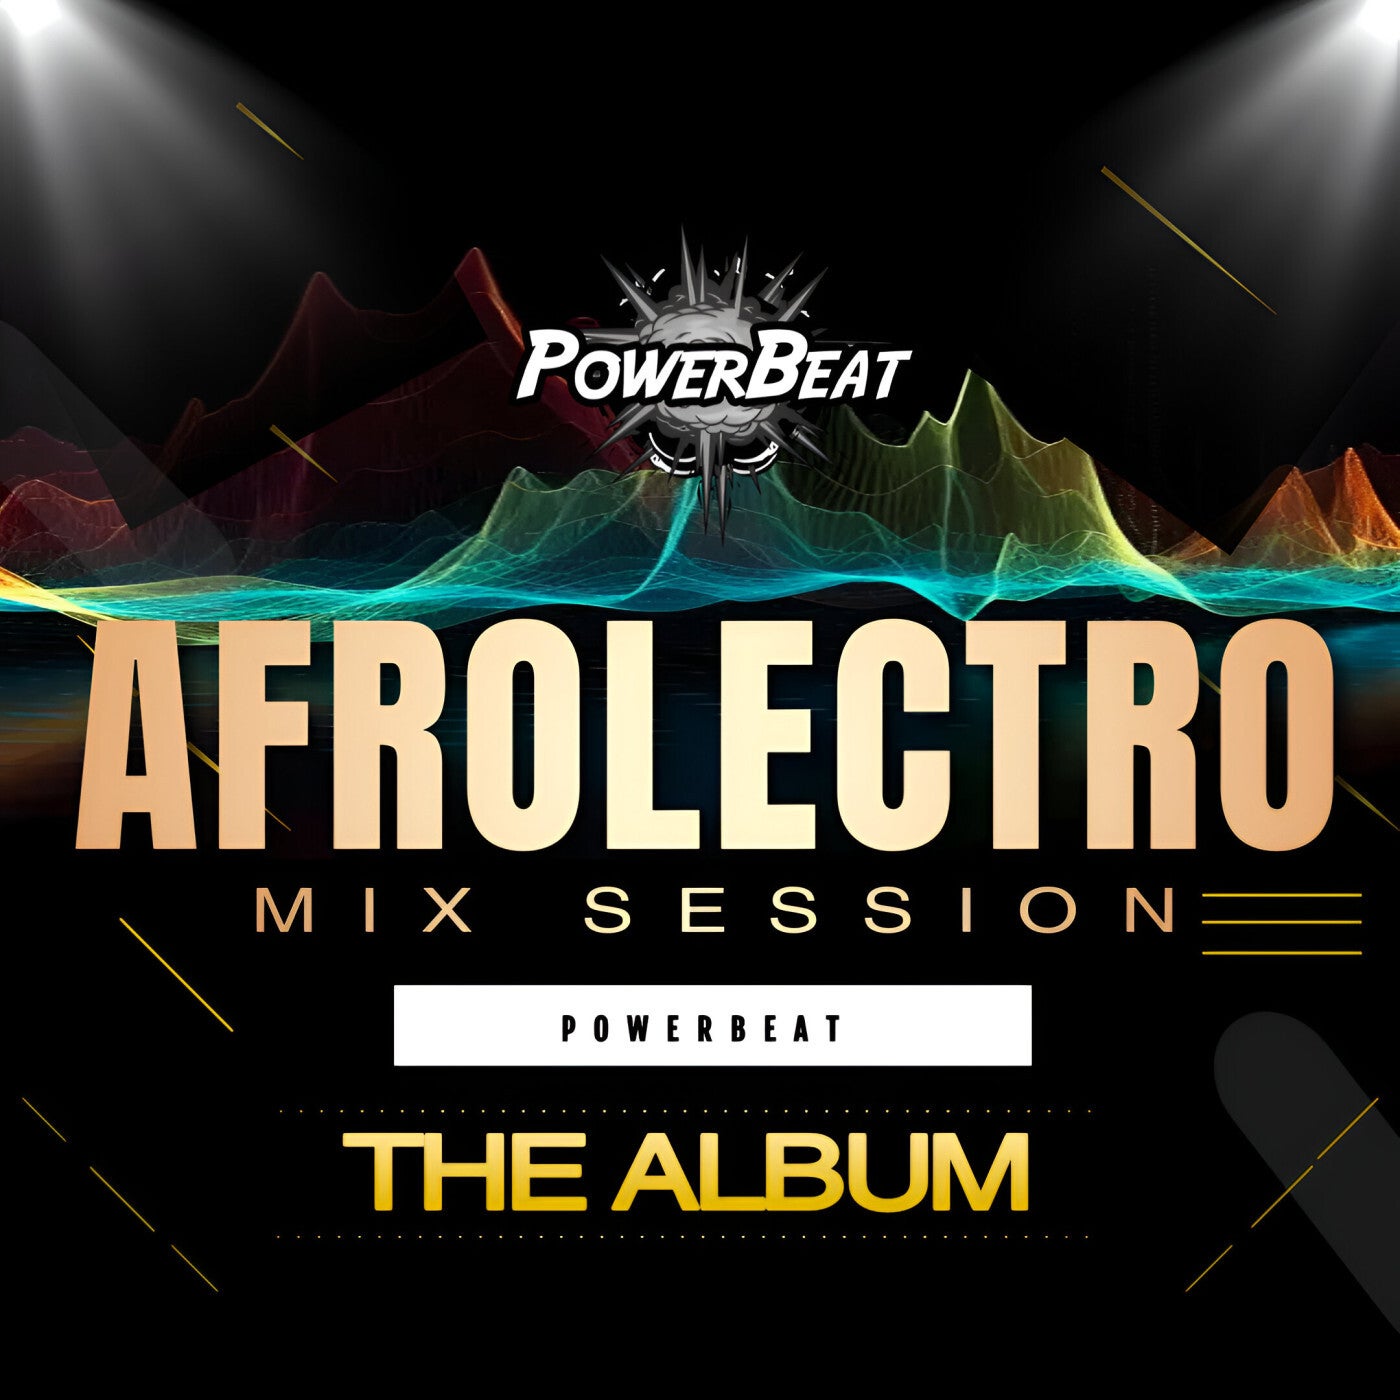 Afrolectro Mix Session (Powerbeat The Album)